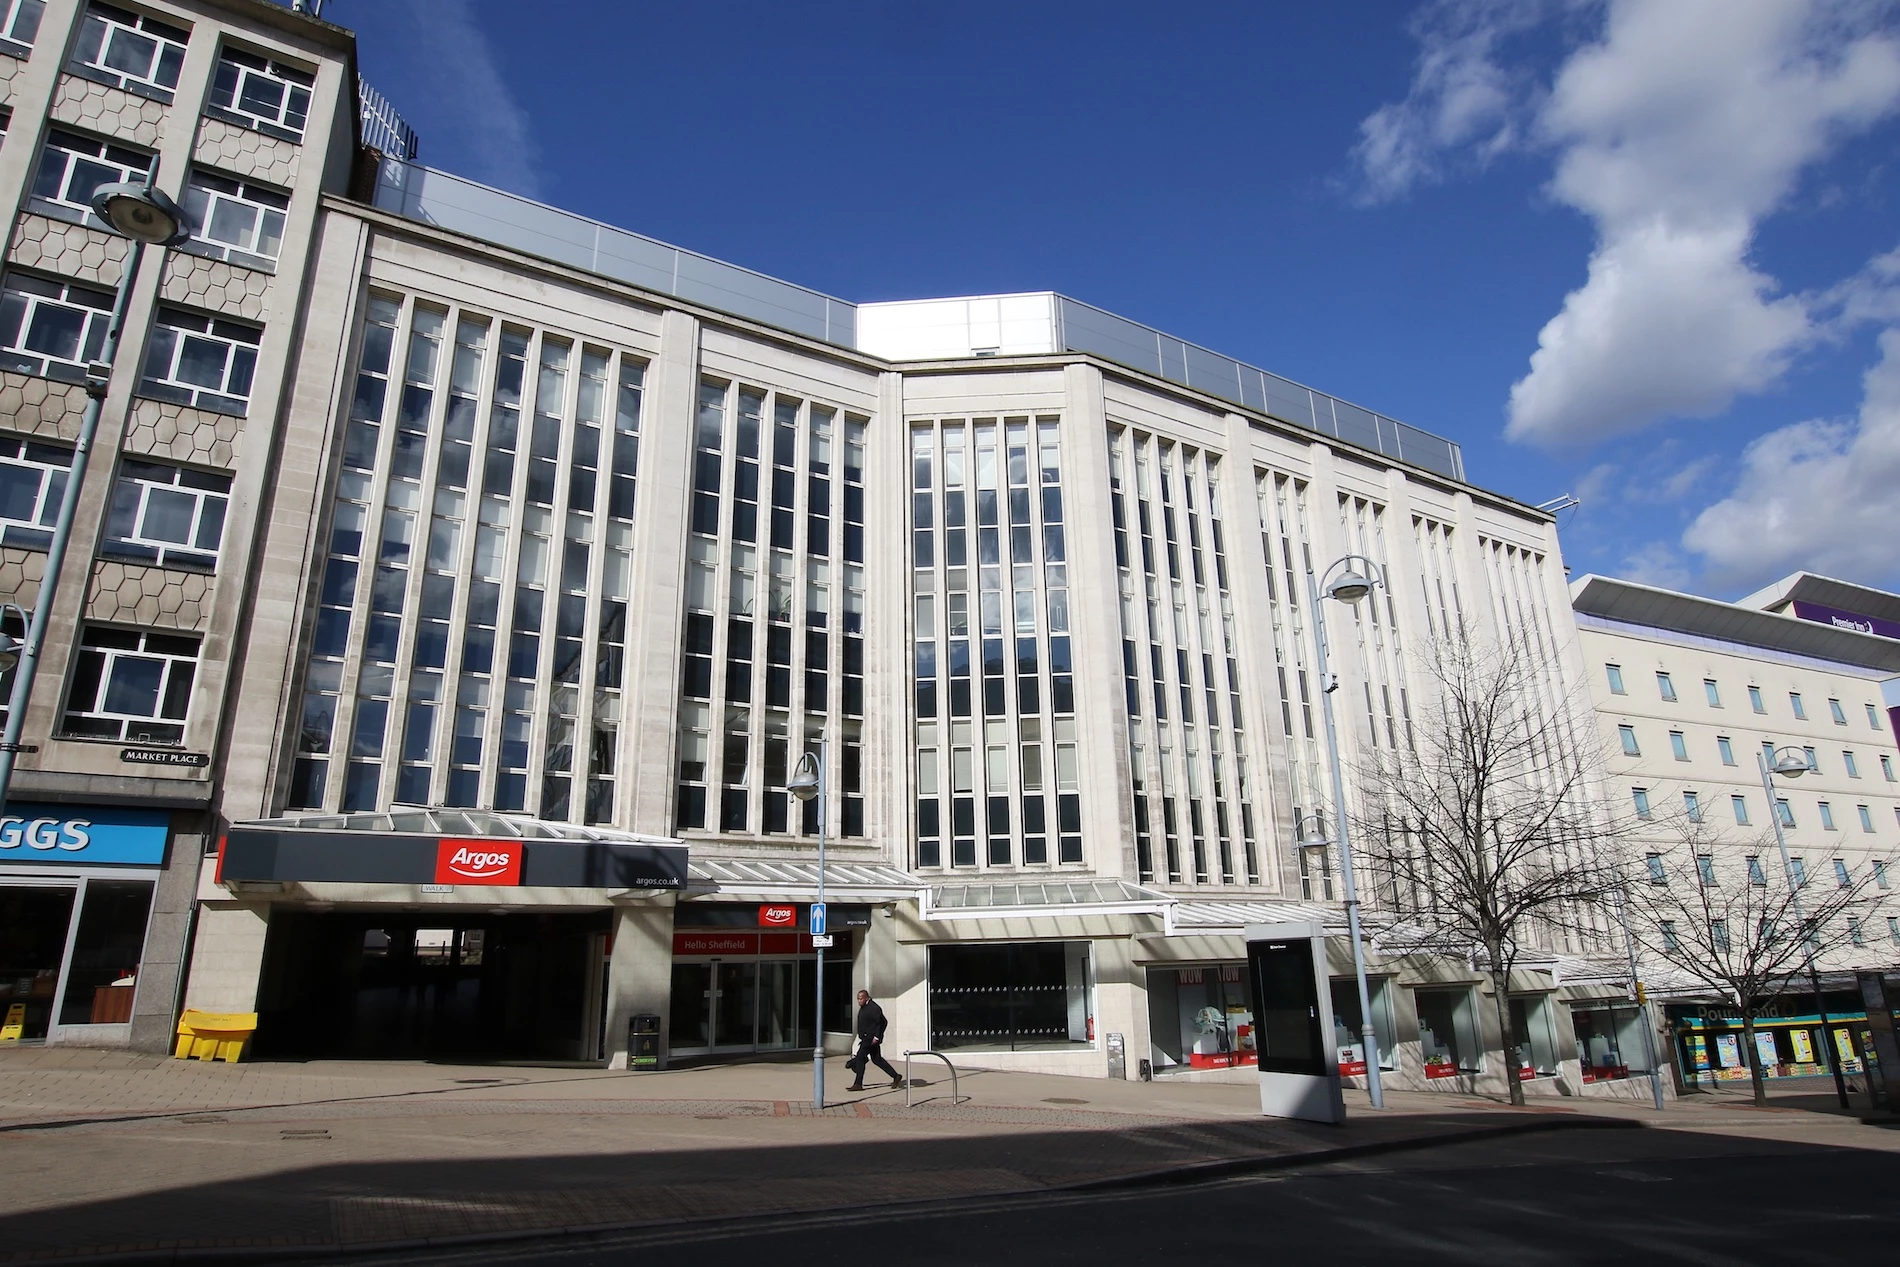 Hartshead Square, a prime city centre mixed-use commercial development in the heart of Sheffield